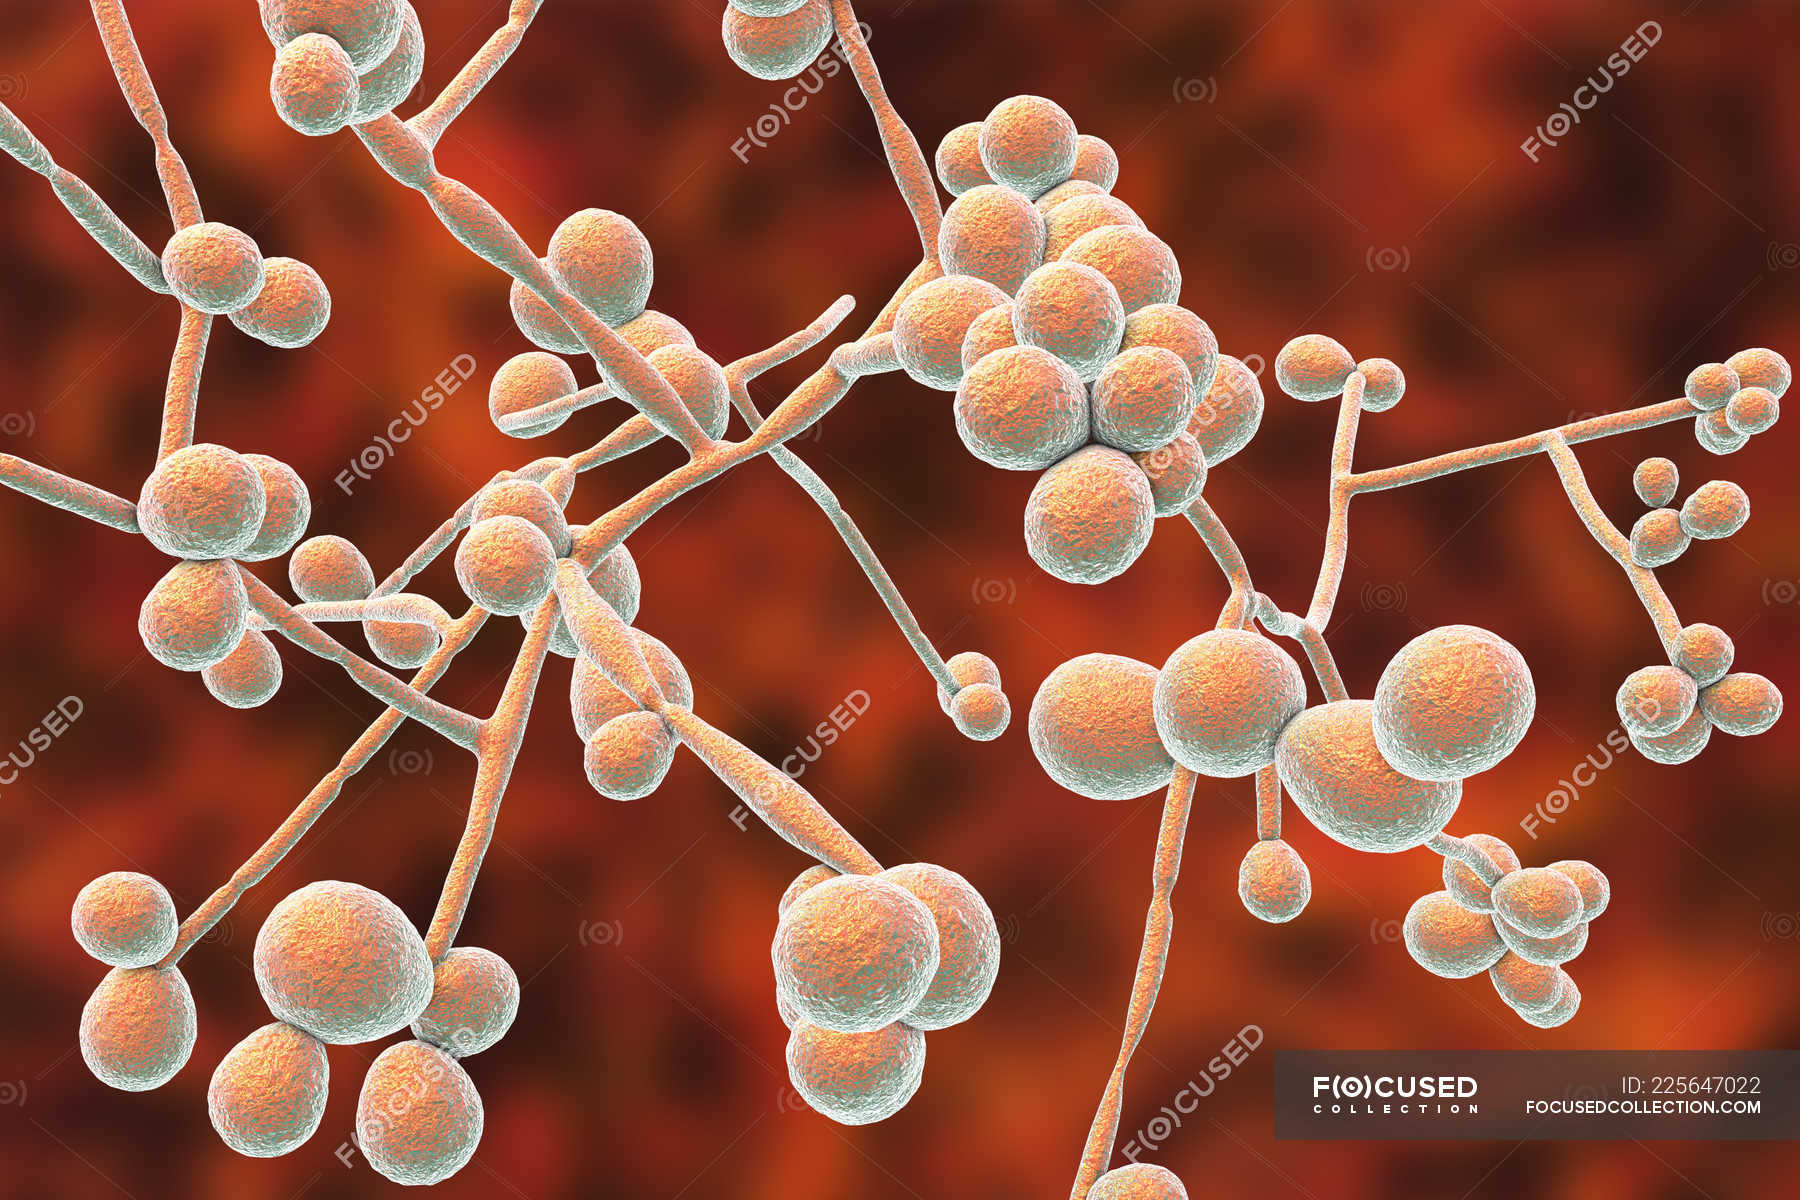 Digital Illustration Of Yeast And Hyphae Stages Of Candida Albicans Fungus — Mycelium Medicine 